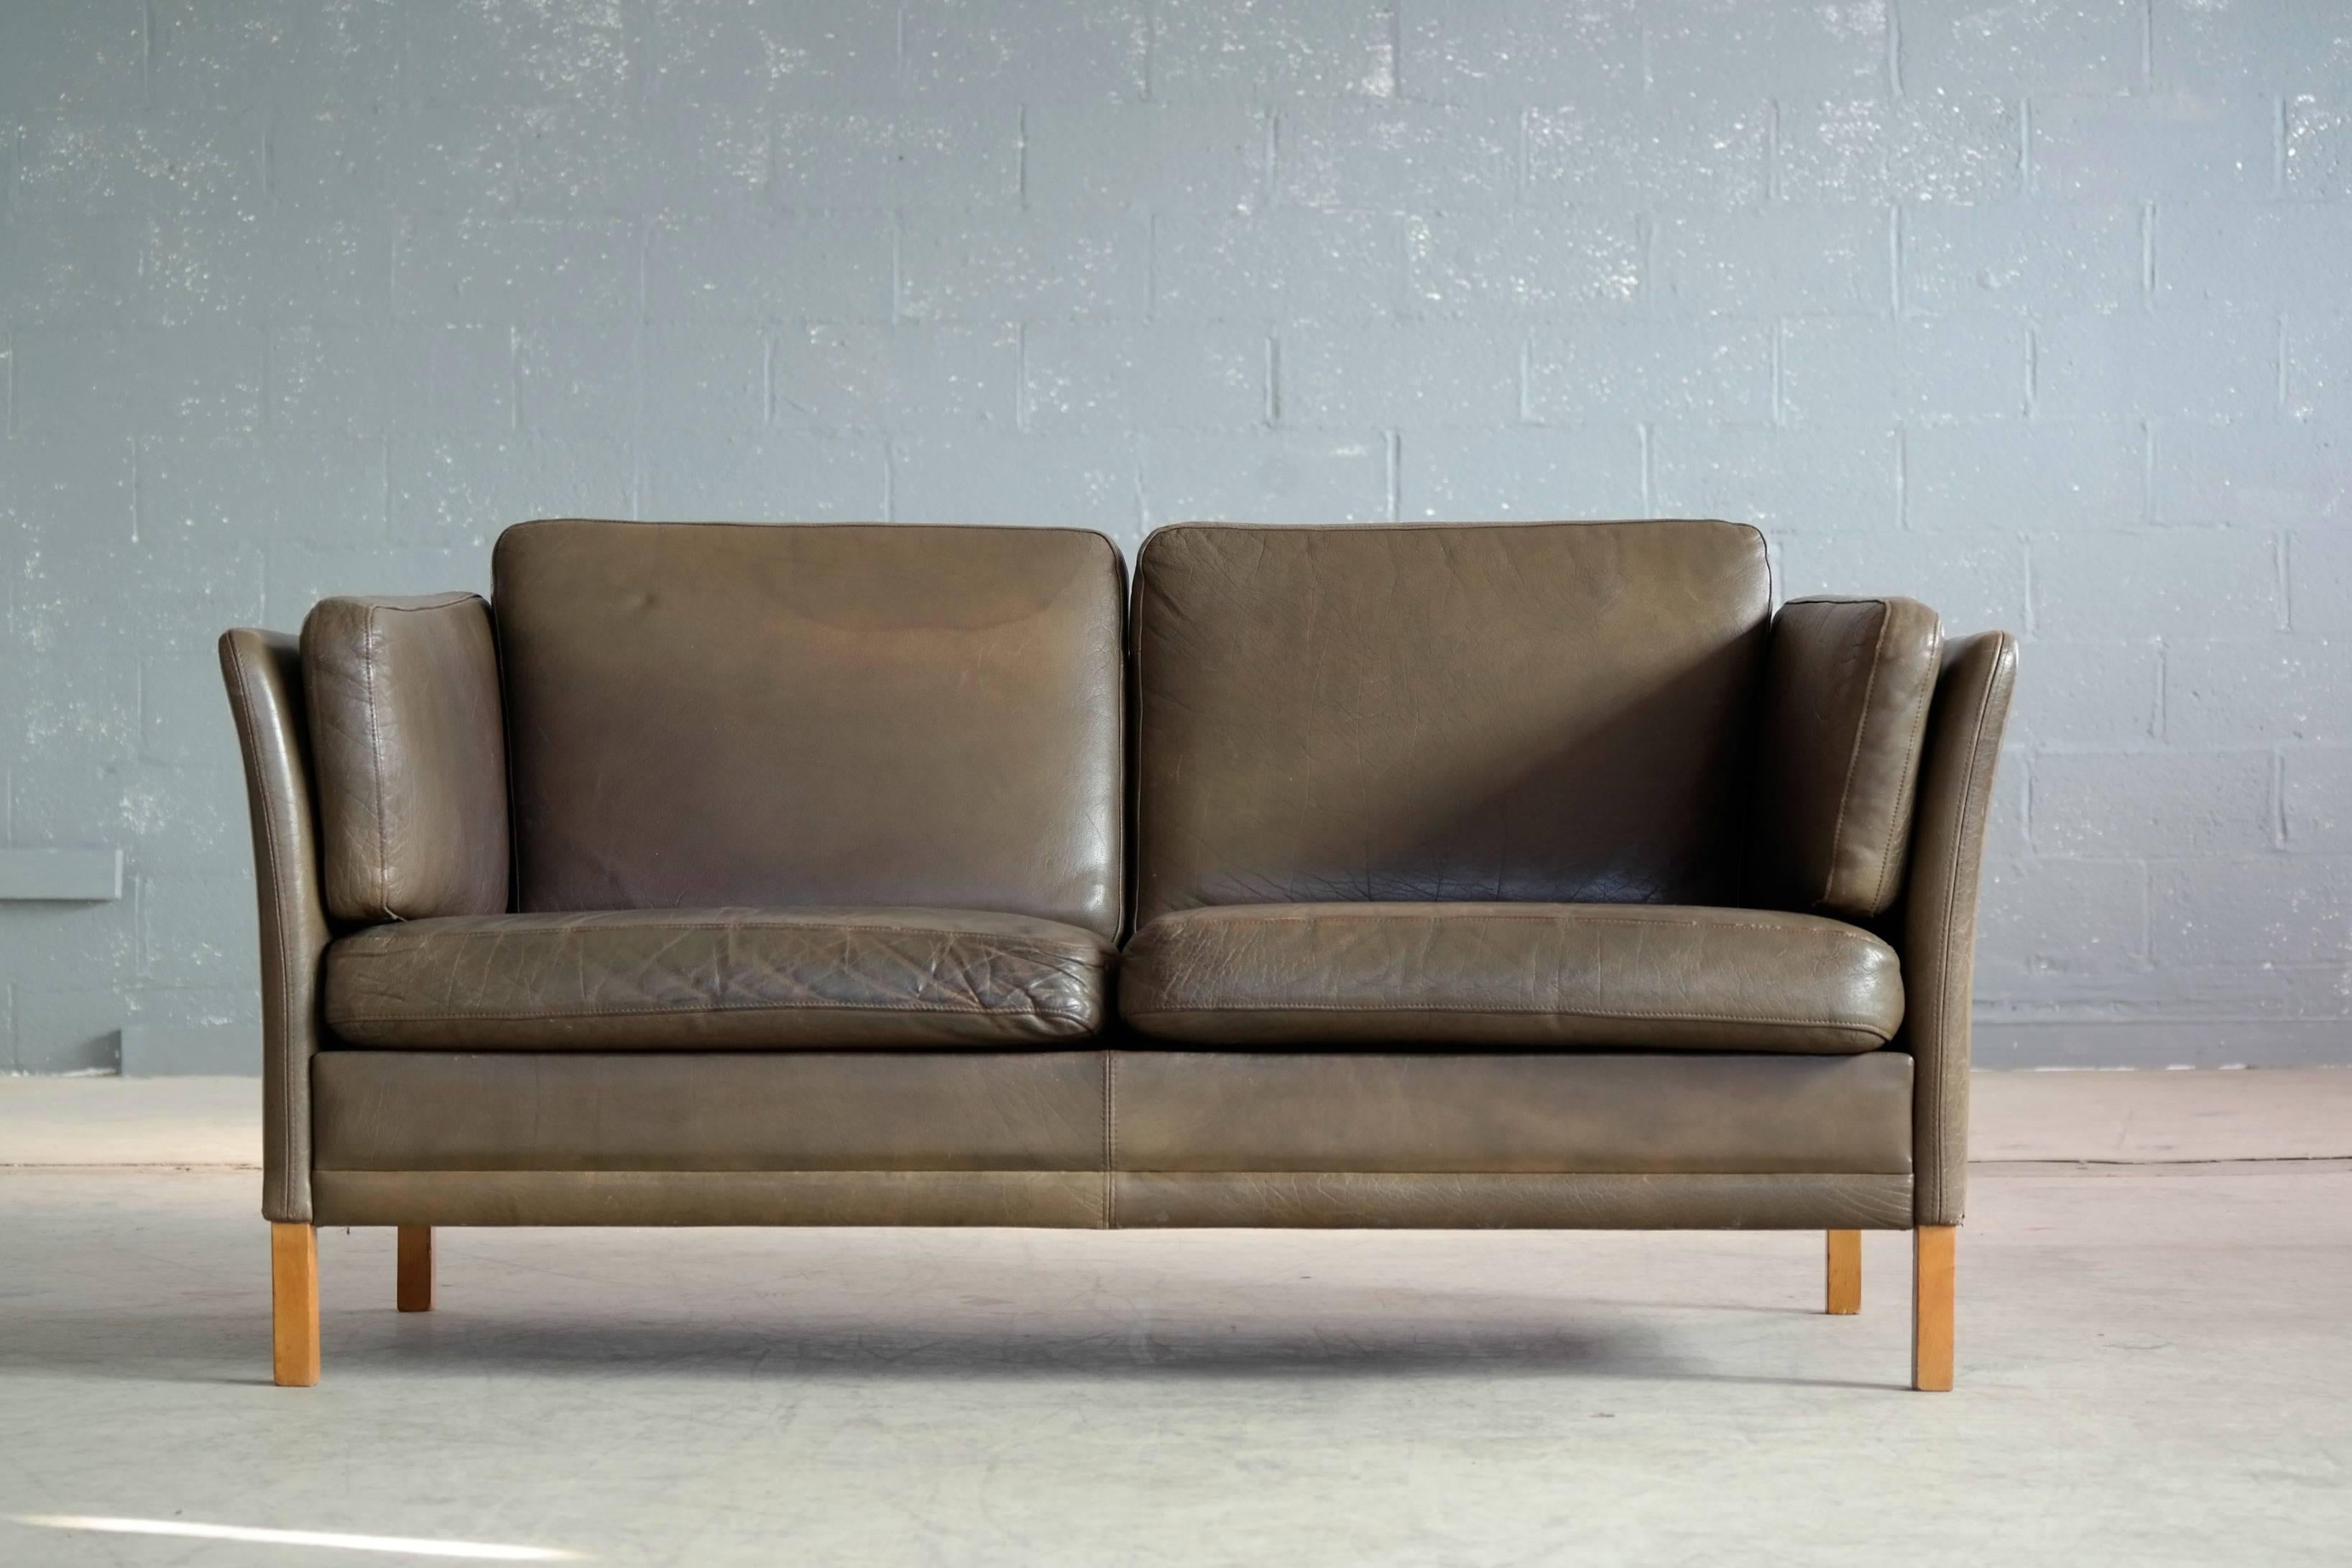 Classic Borge Mogensen style loveseat in dark olive colored buffalo leather designed by Georg Thams for Vejen Polstermobelfabrik, Denmark. Very nice quality leather with great patina and normal age wear. Cushions are foam filled and legs are natural